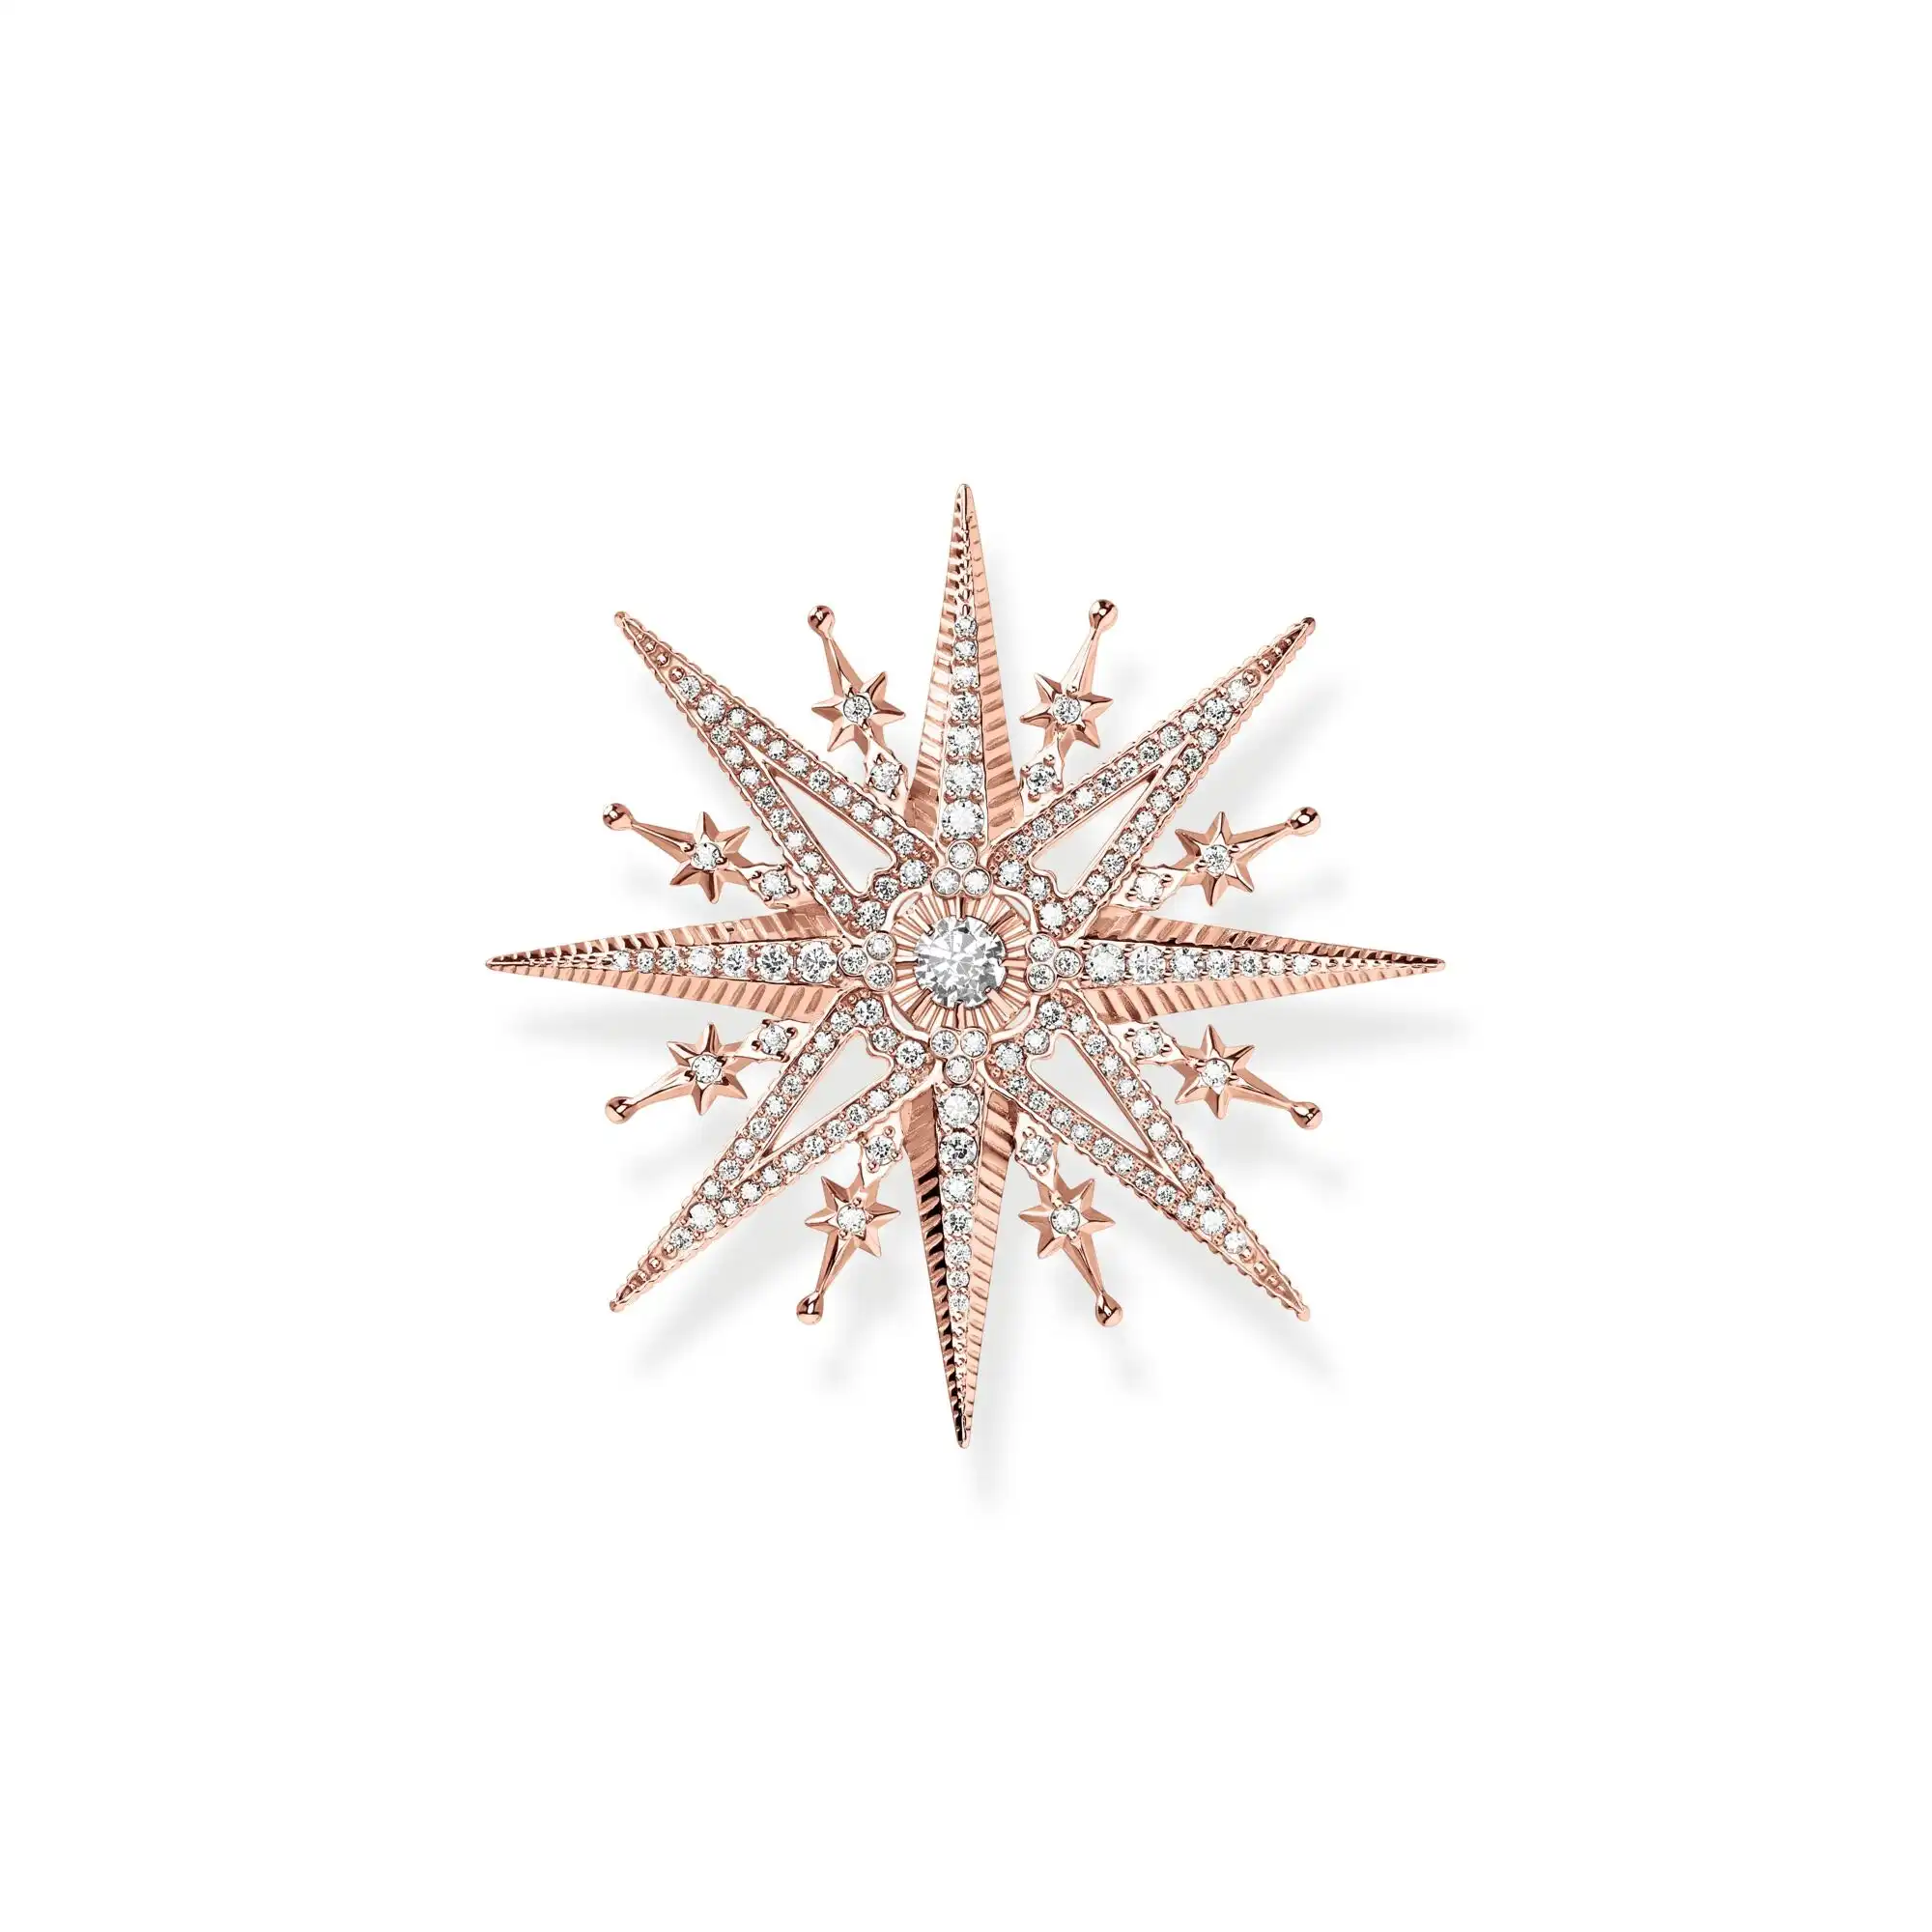 Thomas Sabo Brooch star with pink stones rose gold